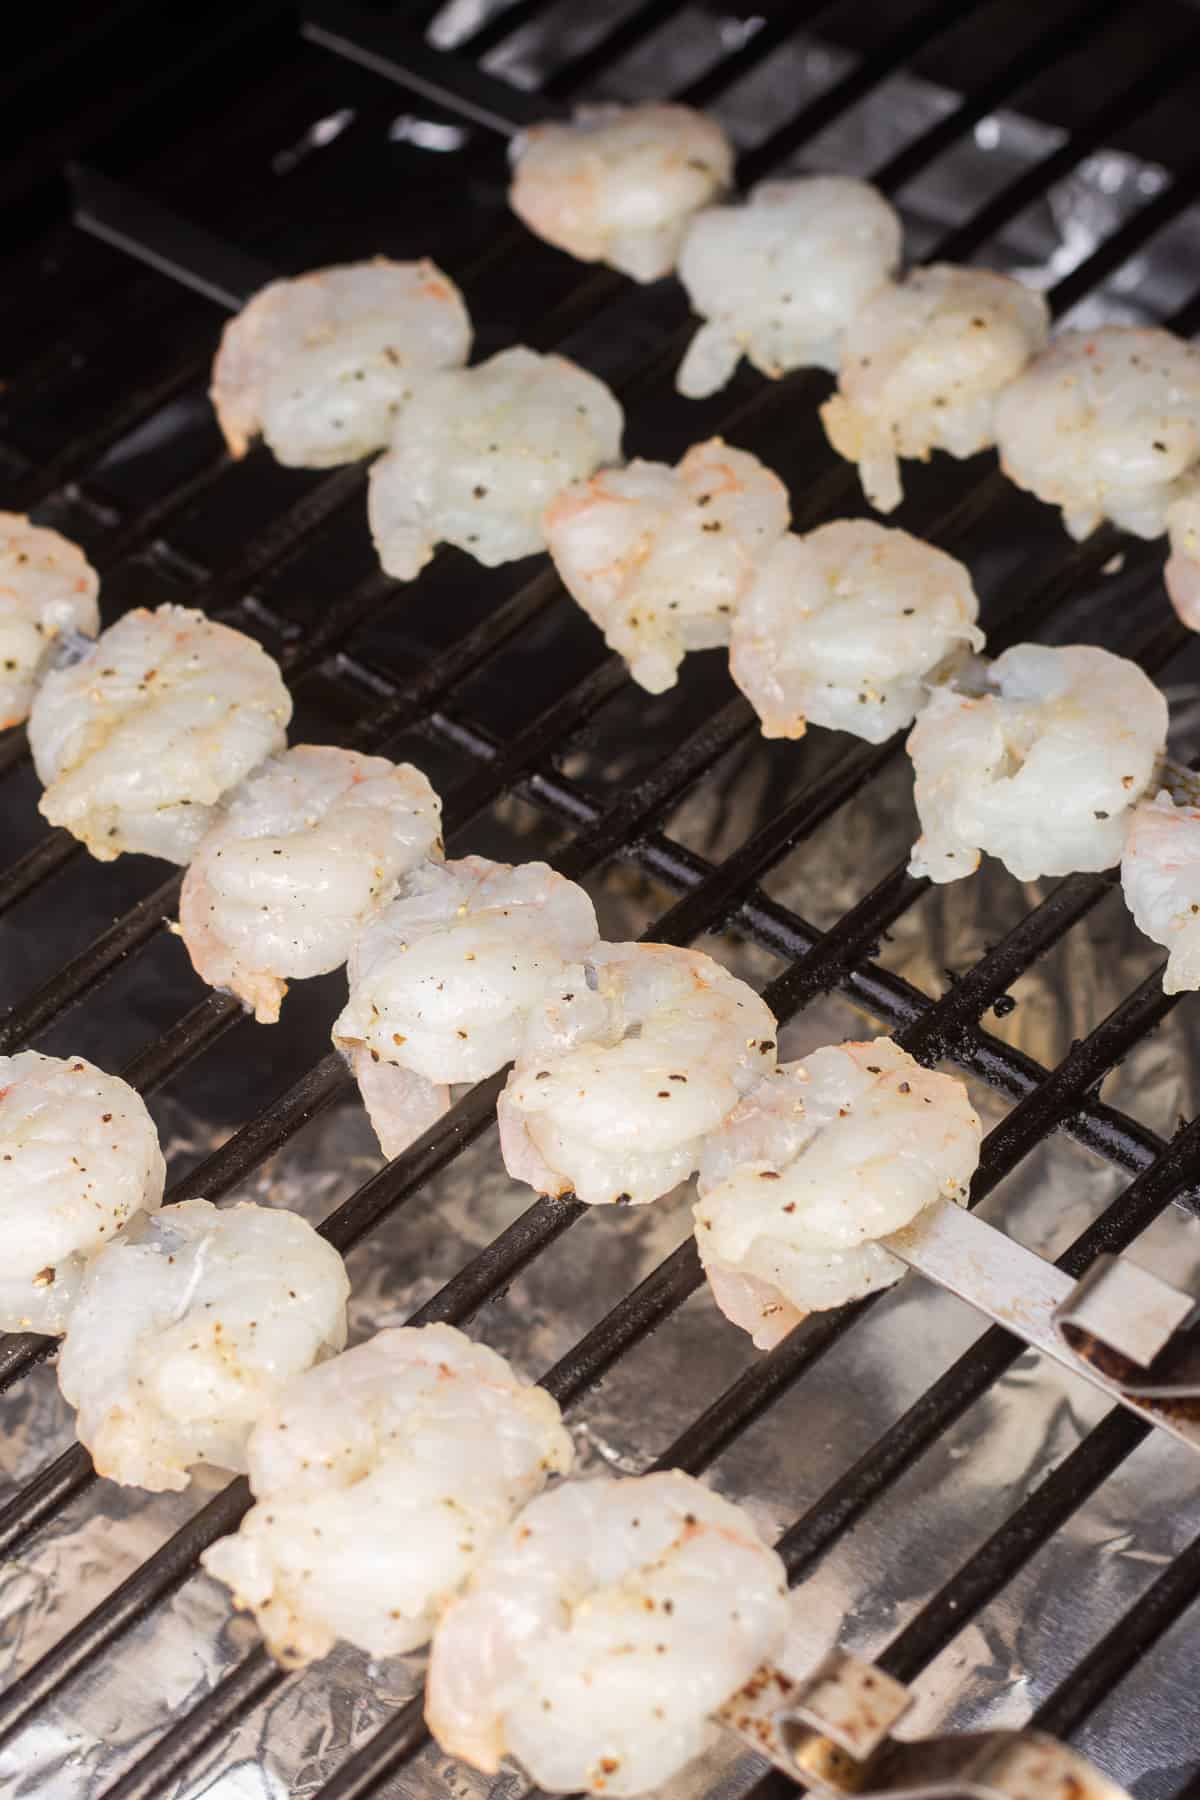 Raw shrimp on metal skewers on grill grates.